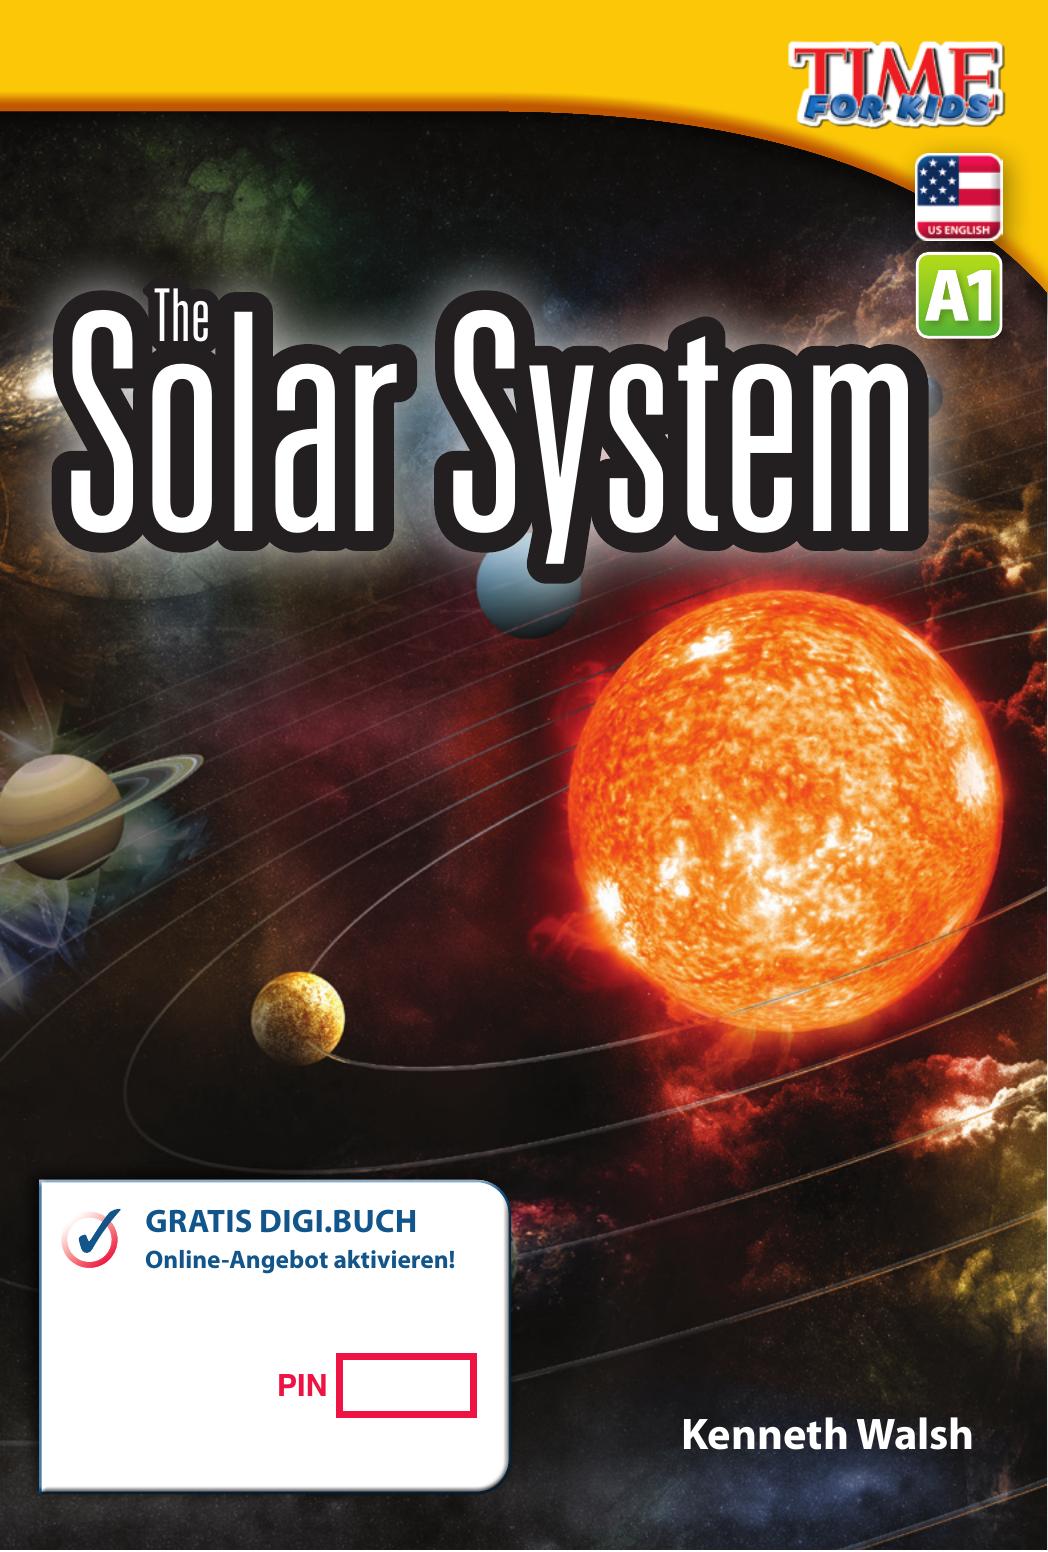 A1 – The Solar System